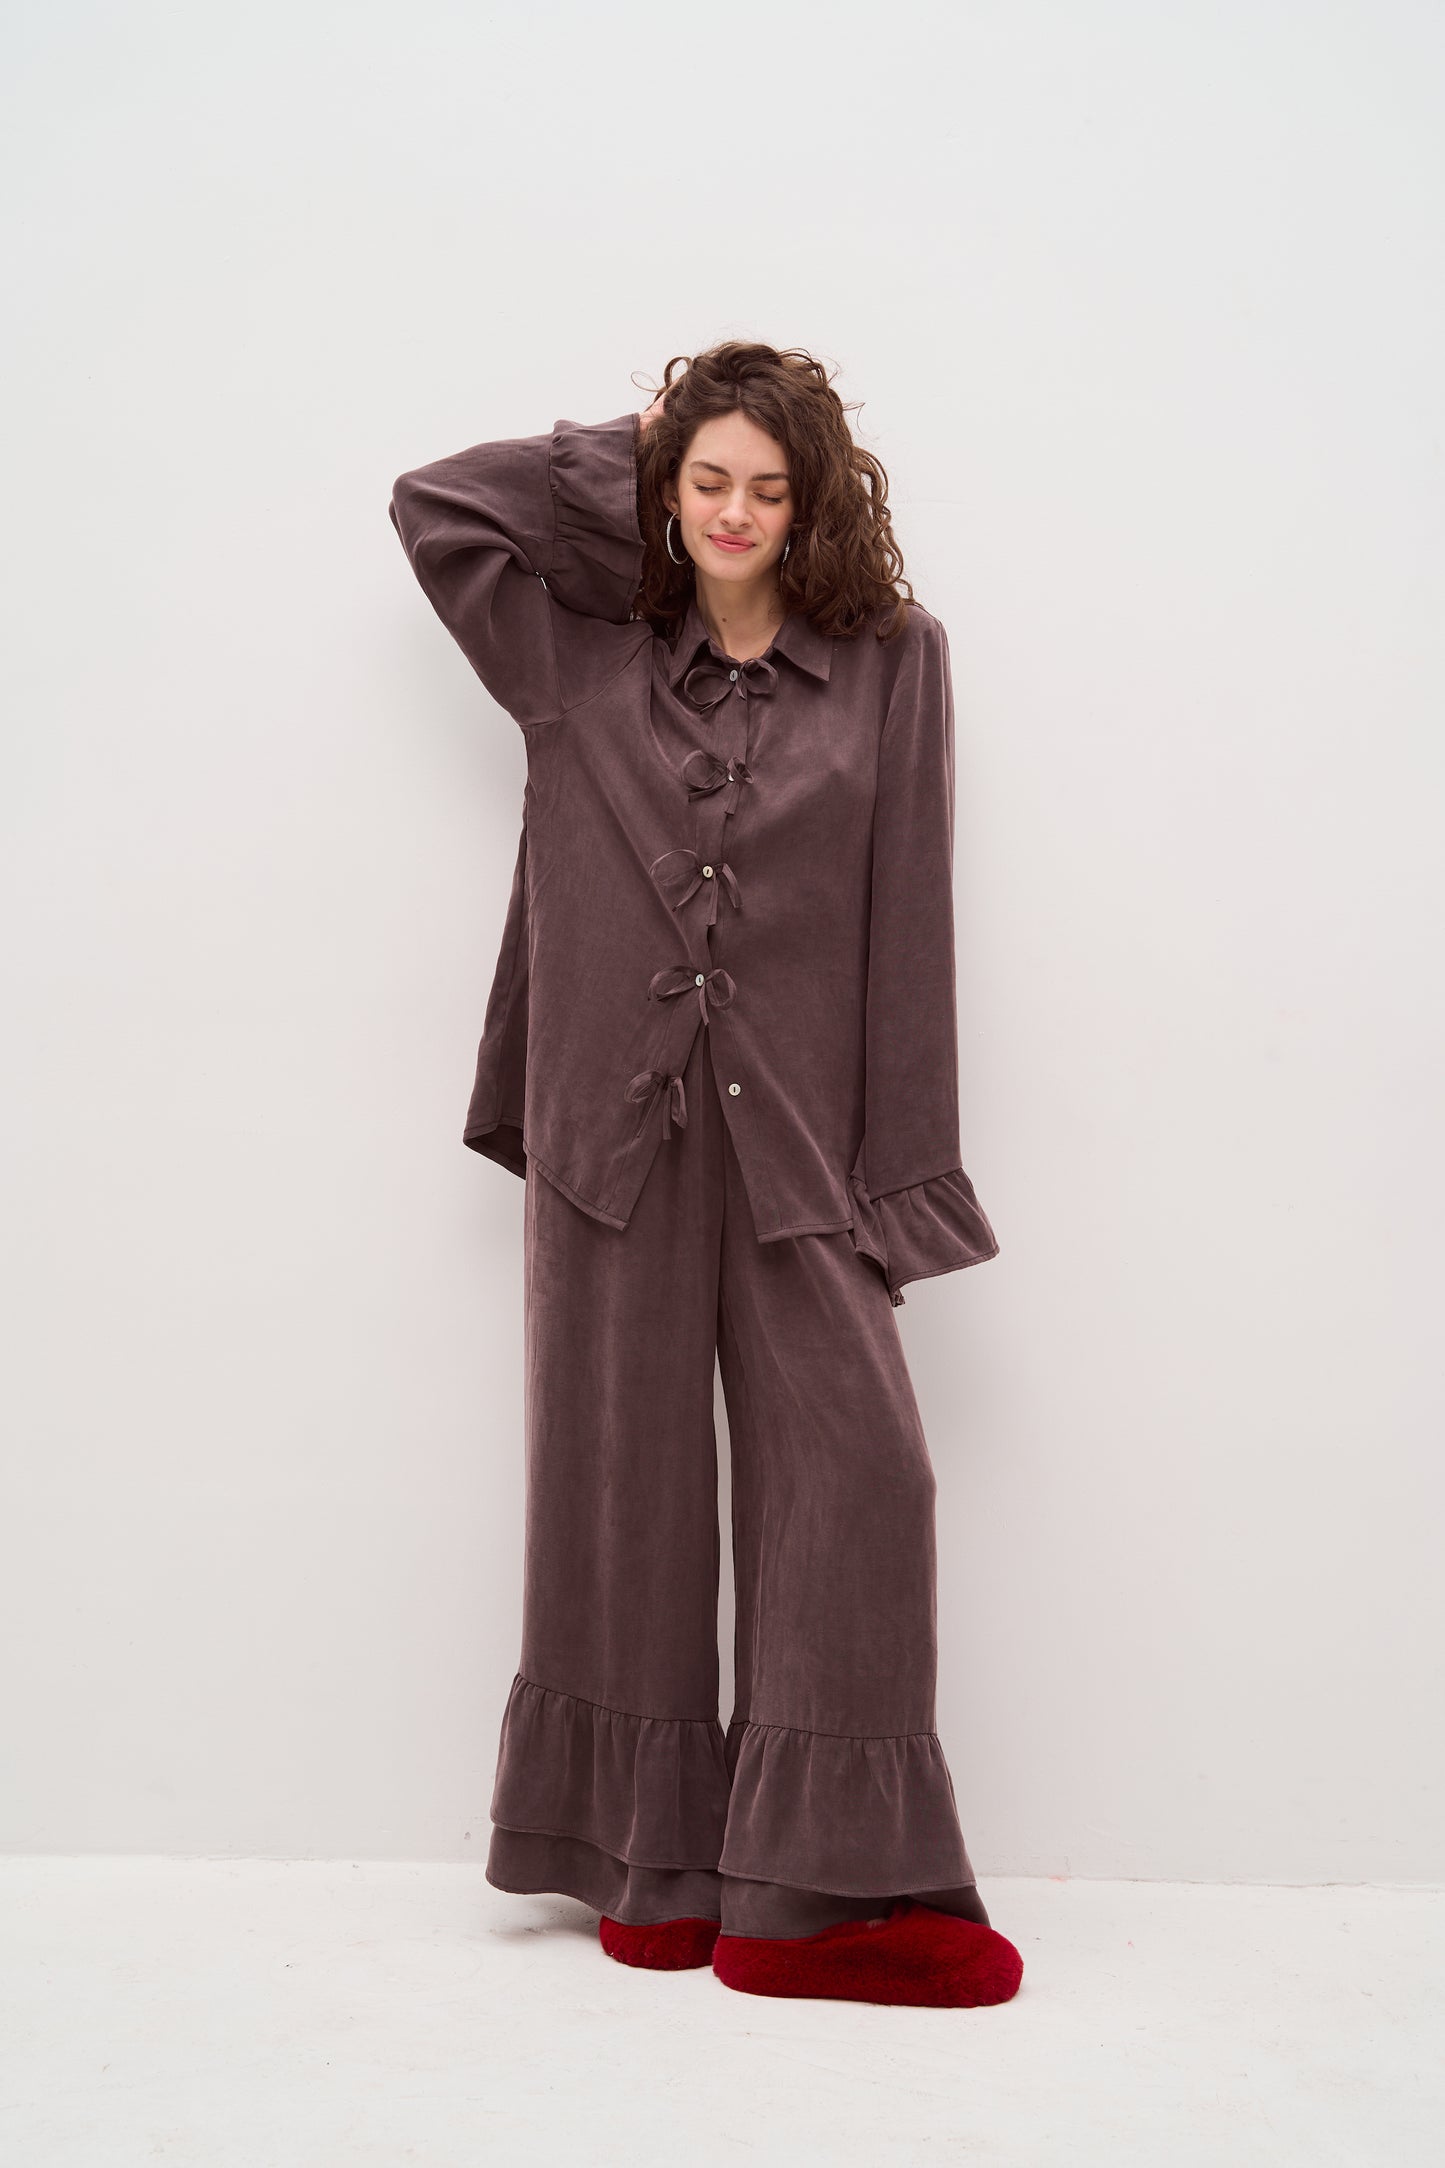 Brown-gray pants with ruffles